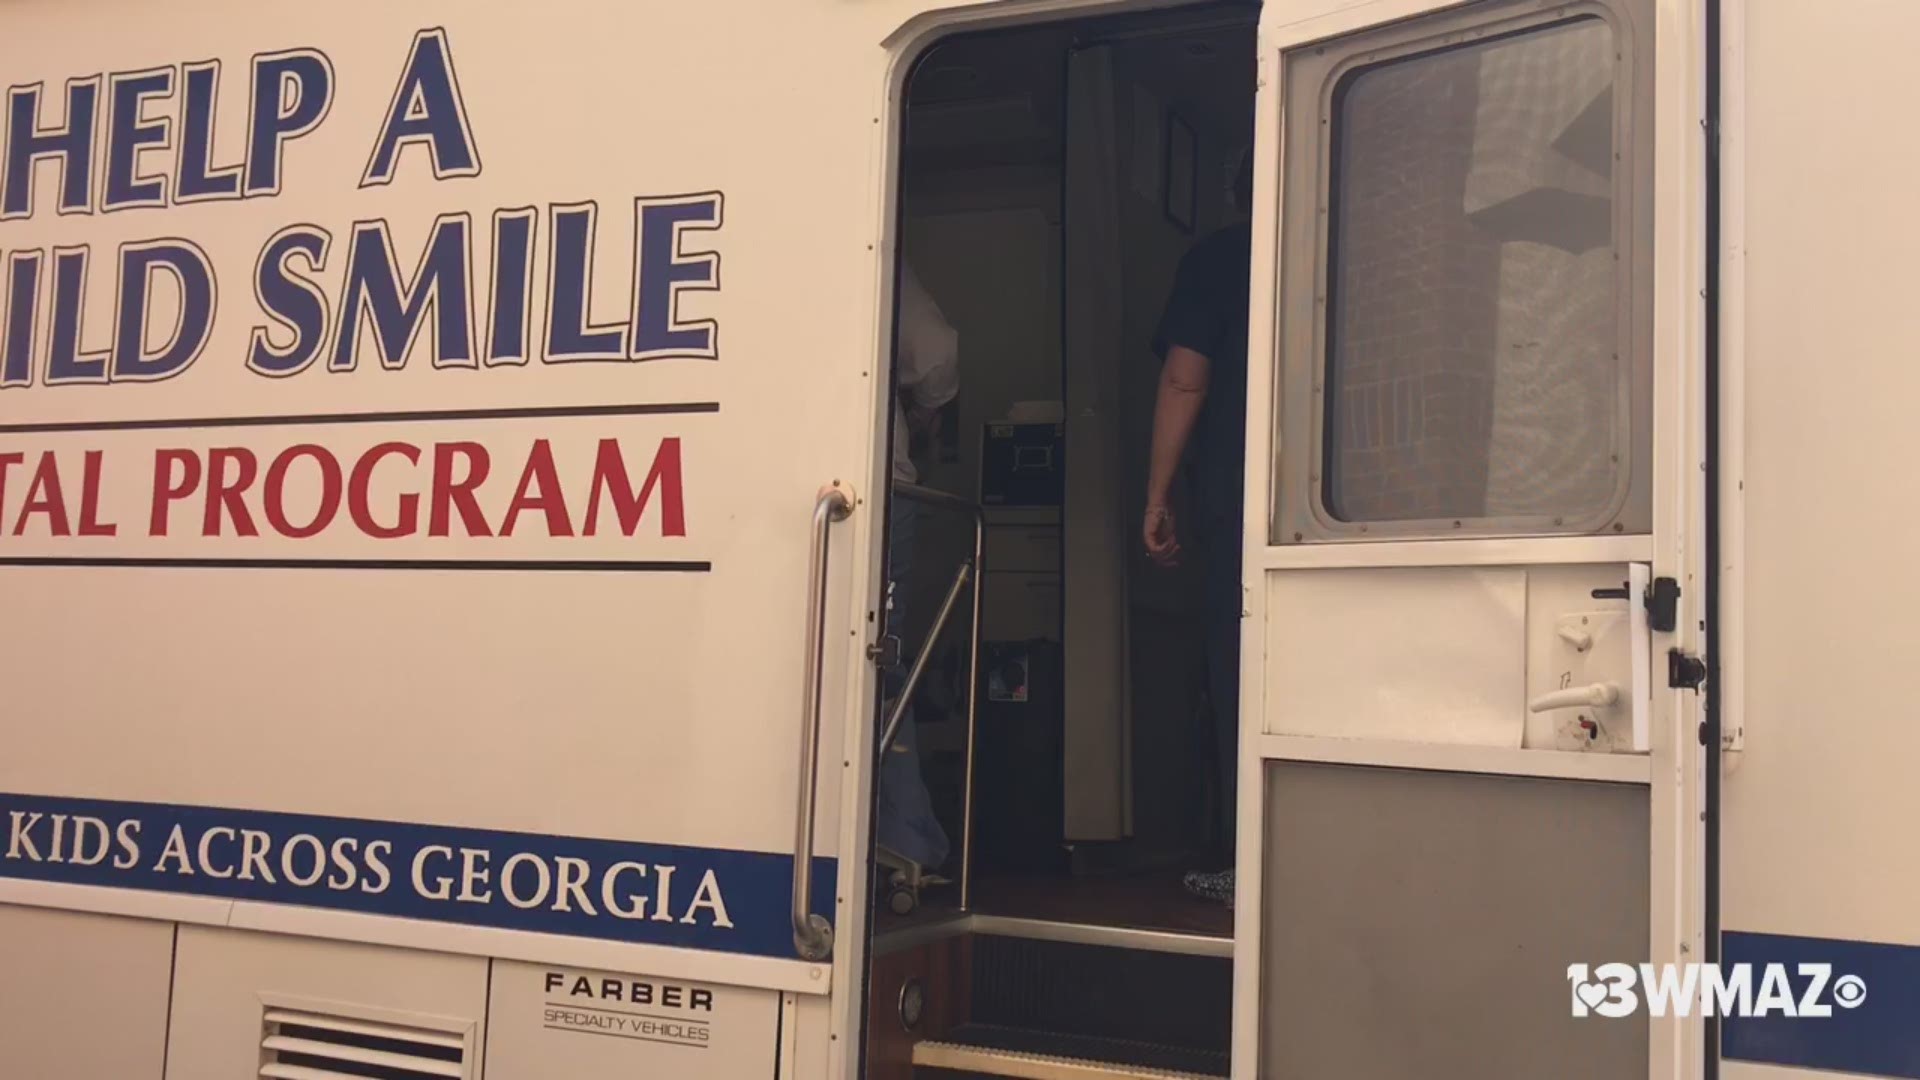 The school is hosting an all-day mobile dentist's office on campus, run by the Help a Child Smile Dental Program, to give students dental care.